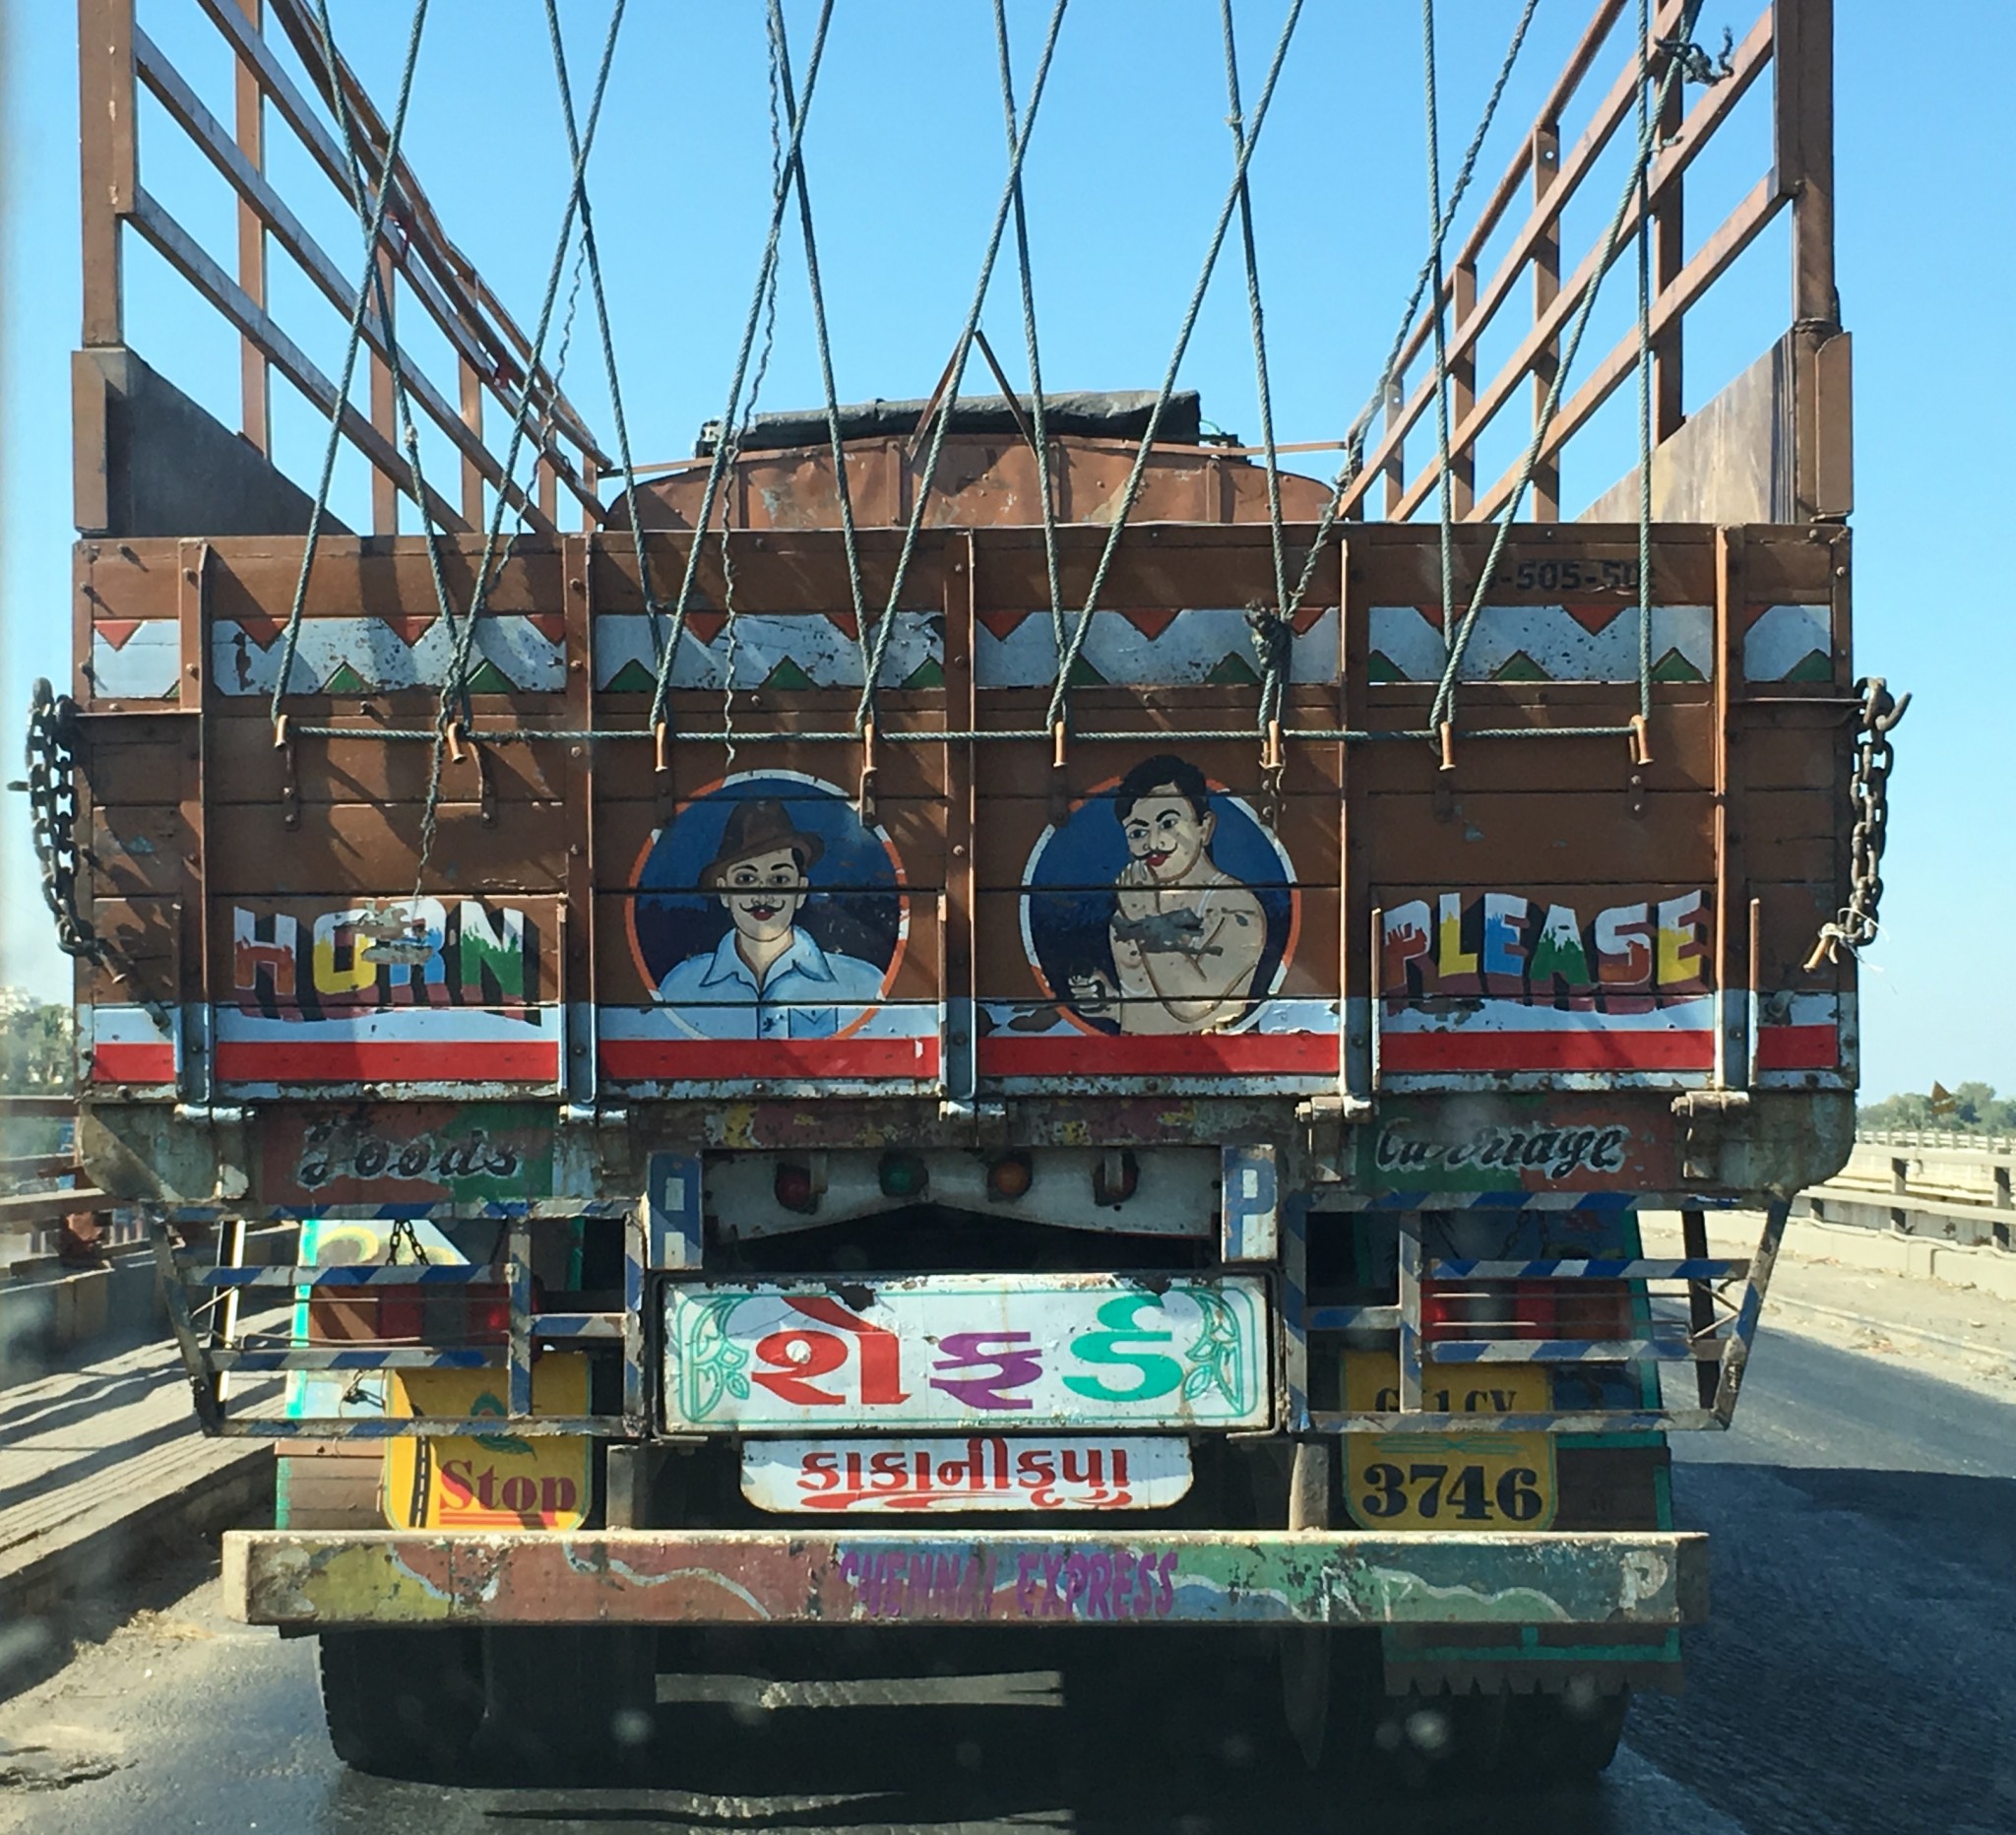 Indian Trucks Art Galleries On Wheels Holly Bolly India